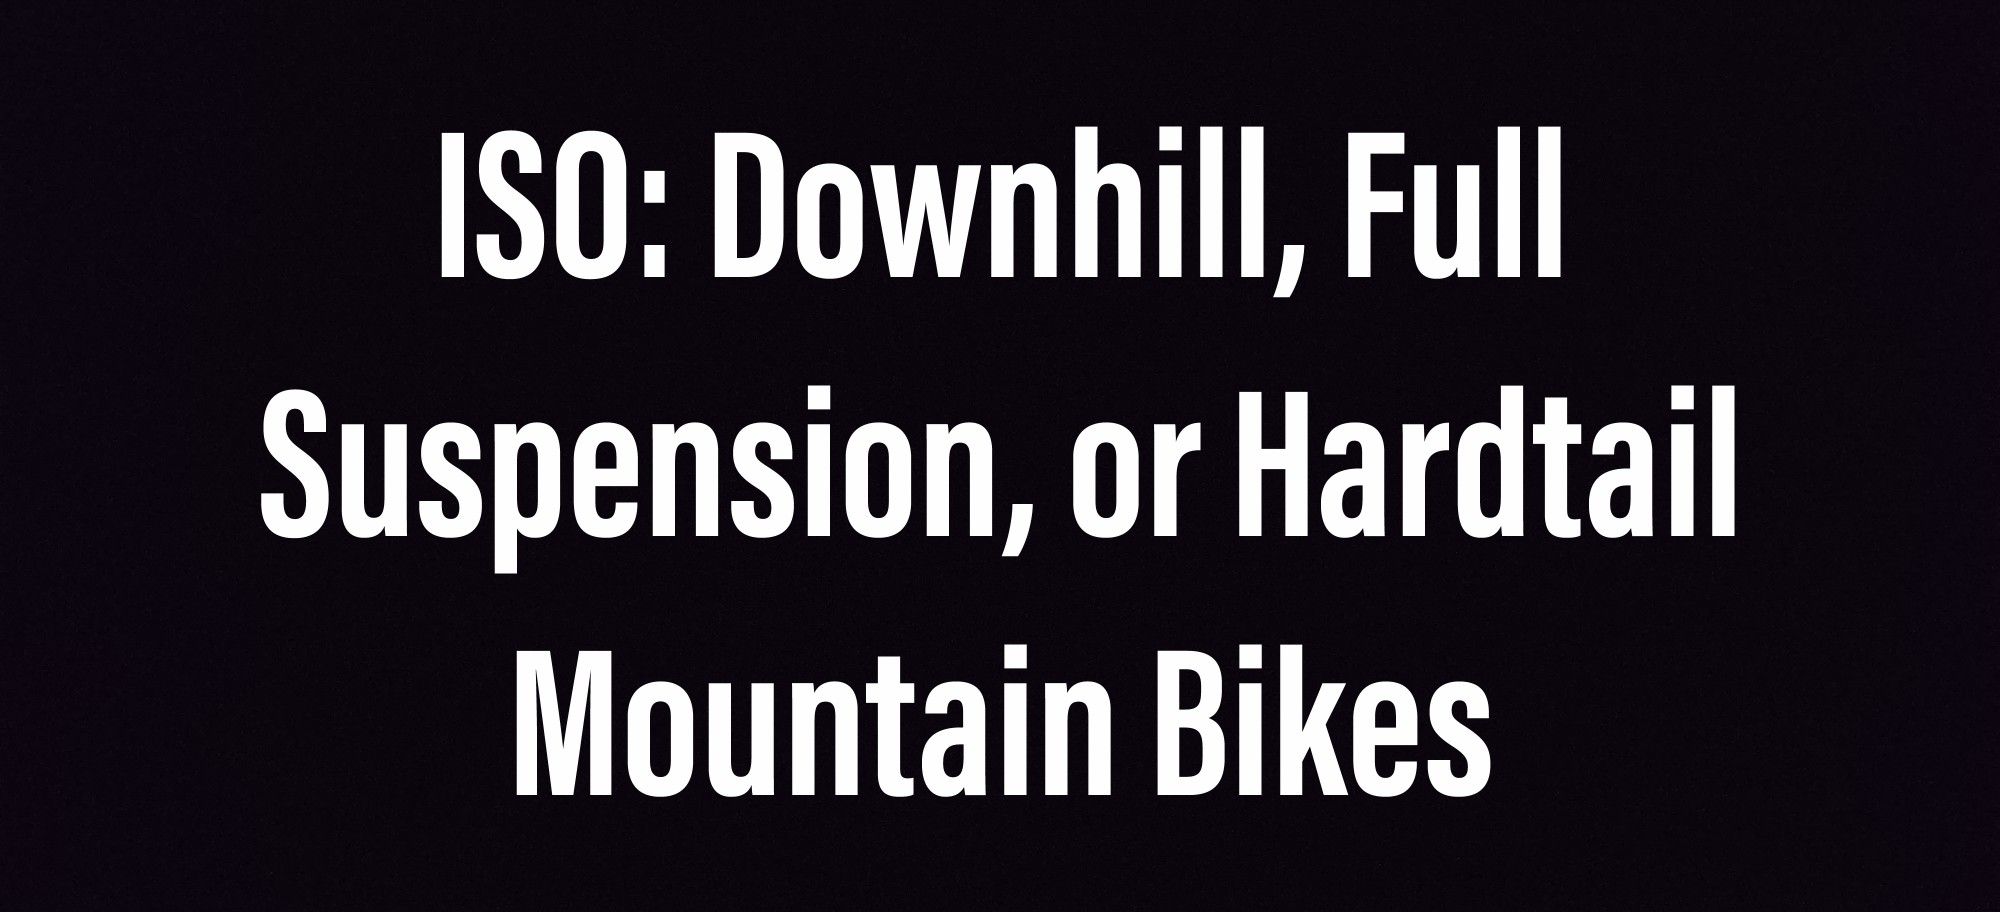 ISO: Downhill, Full Suspension, or Hardtail Mountain Bike